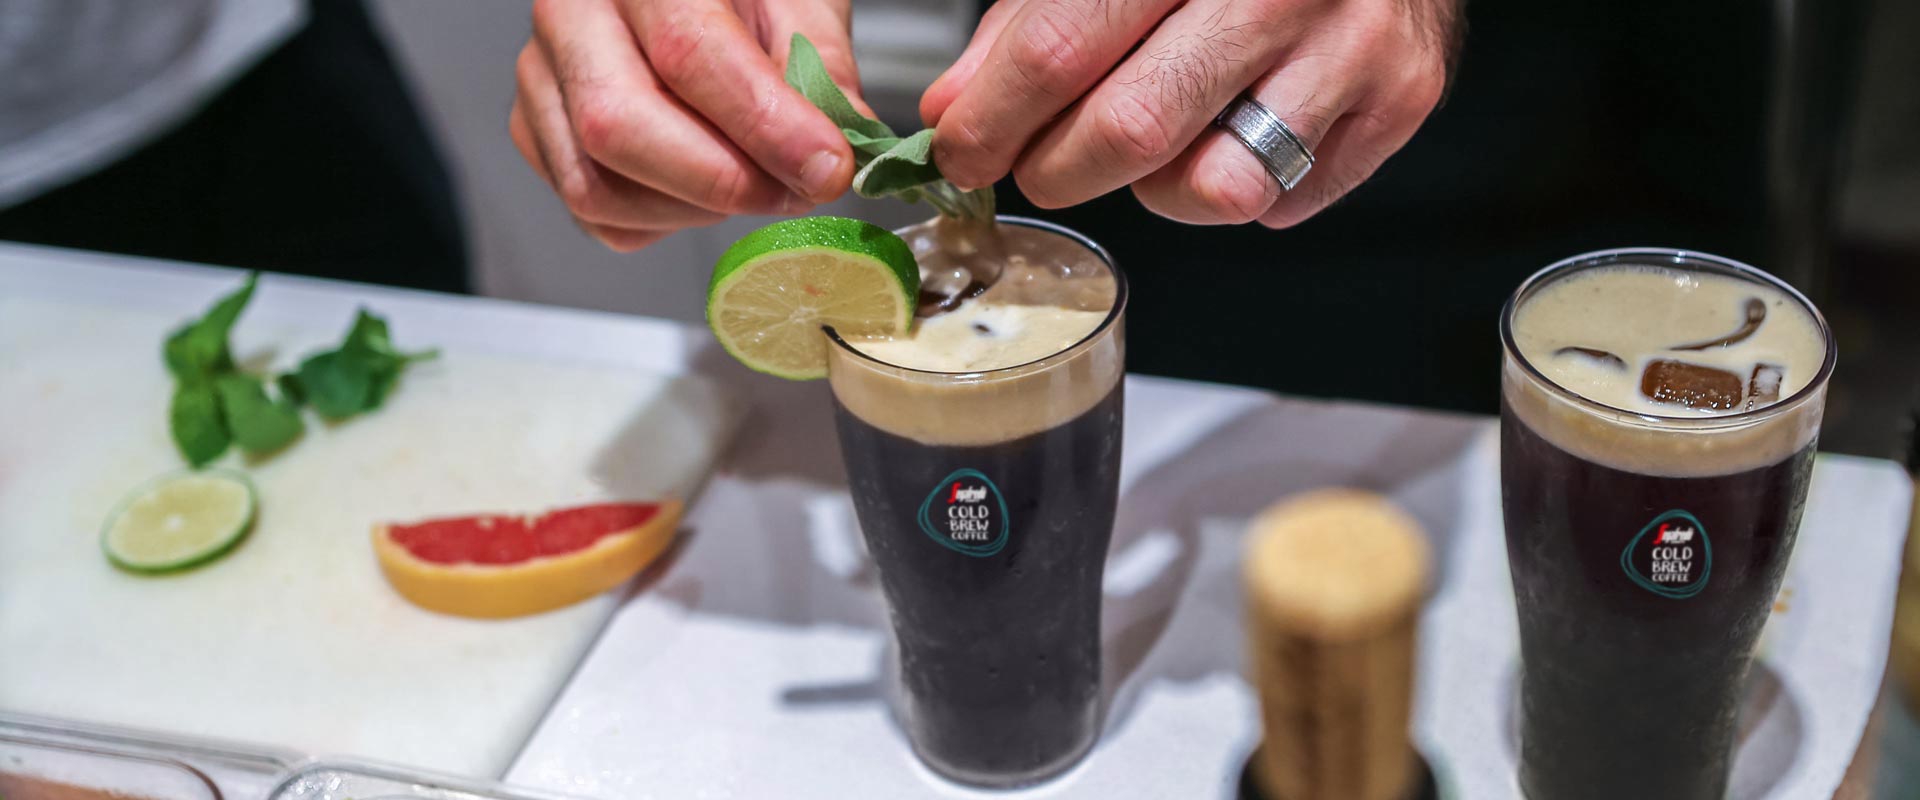 Cold Brew Coffee as a product innovation for Segafredo